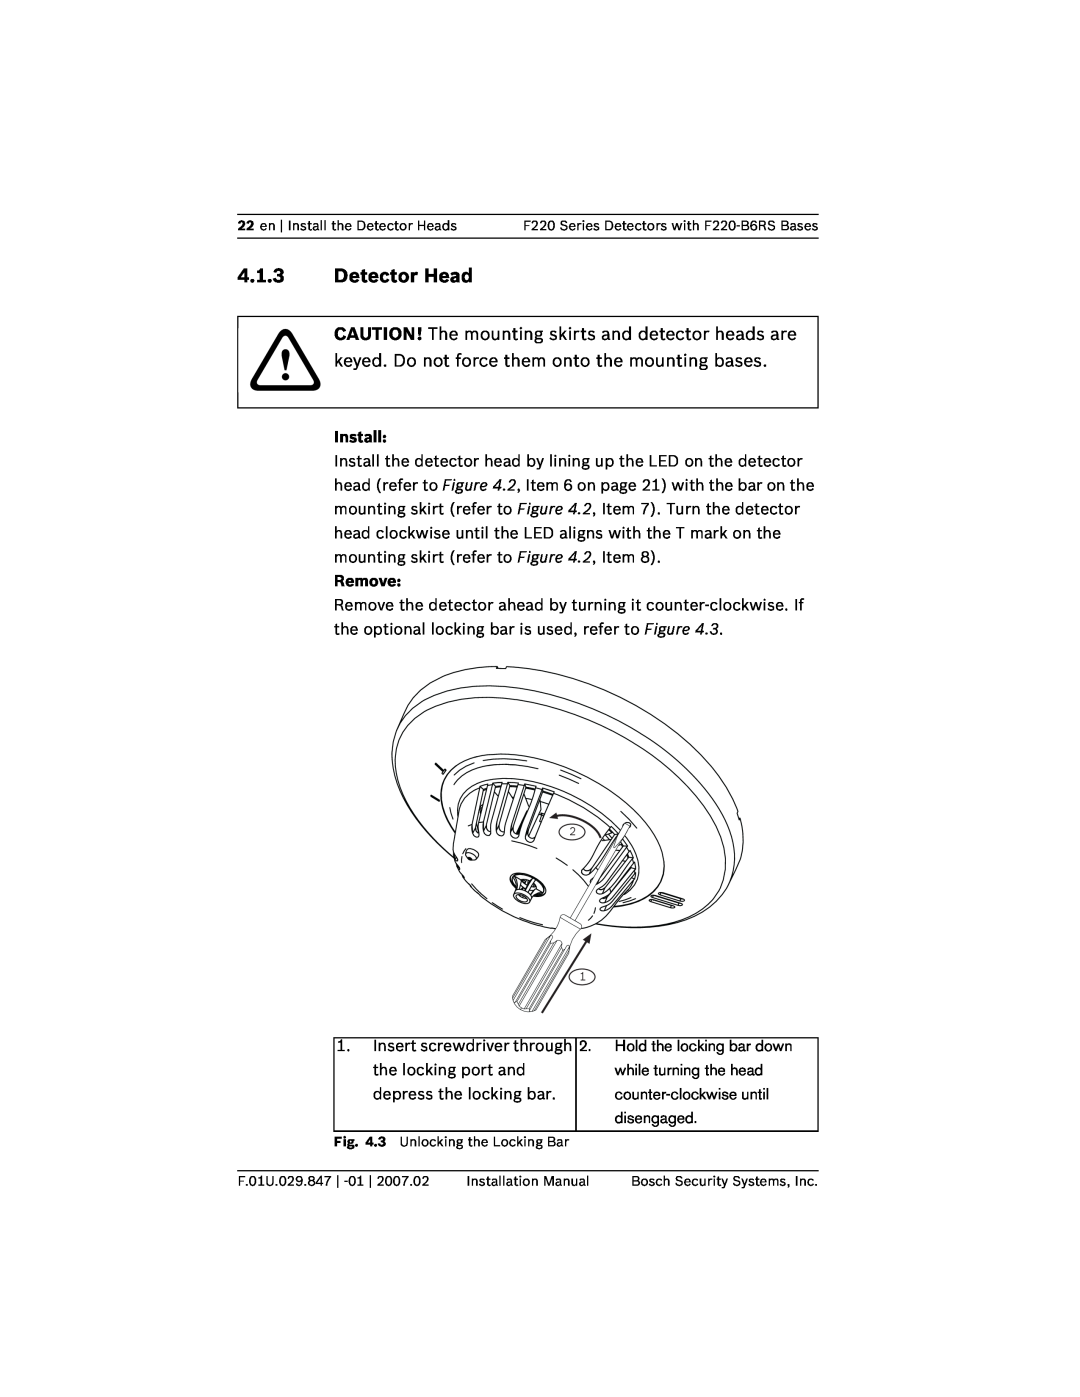 Bosch Appliances F220-B6RS installation manual 4.1.3Detector Head, keyed. Do not force them onto the mounting bases 